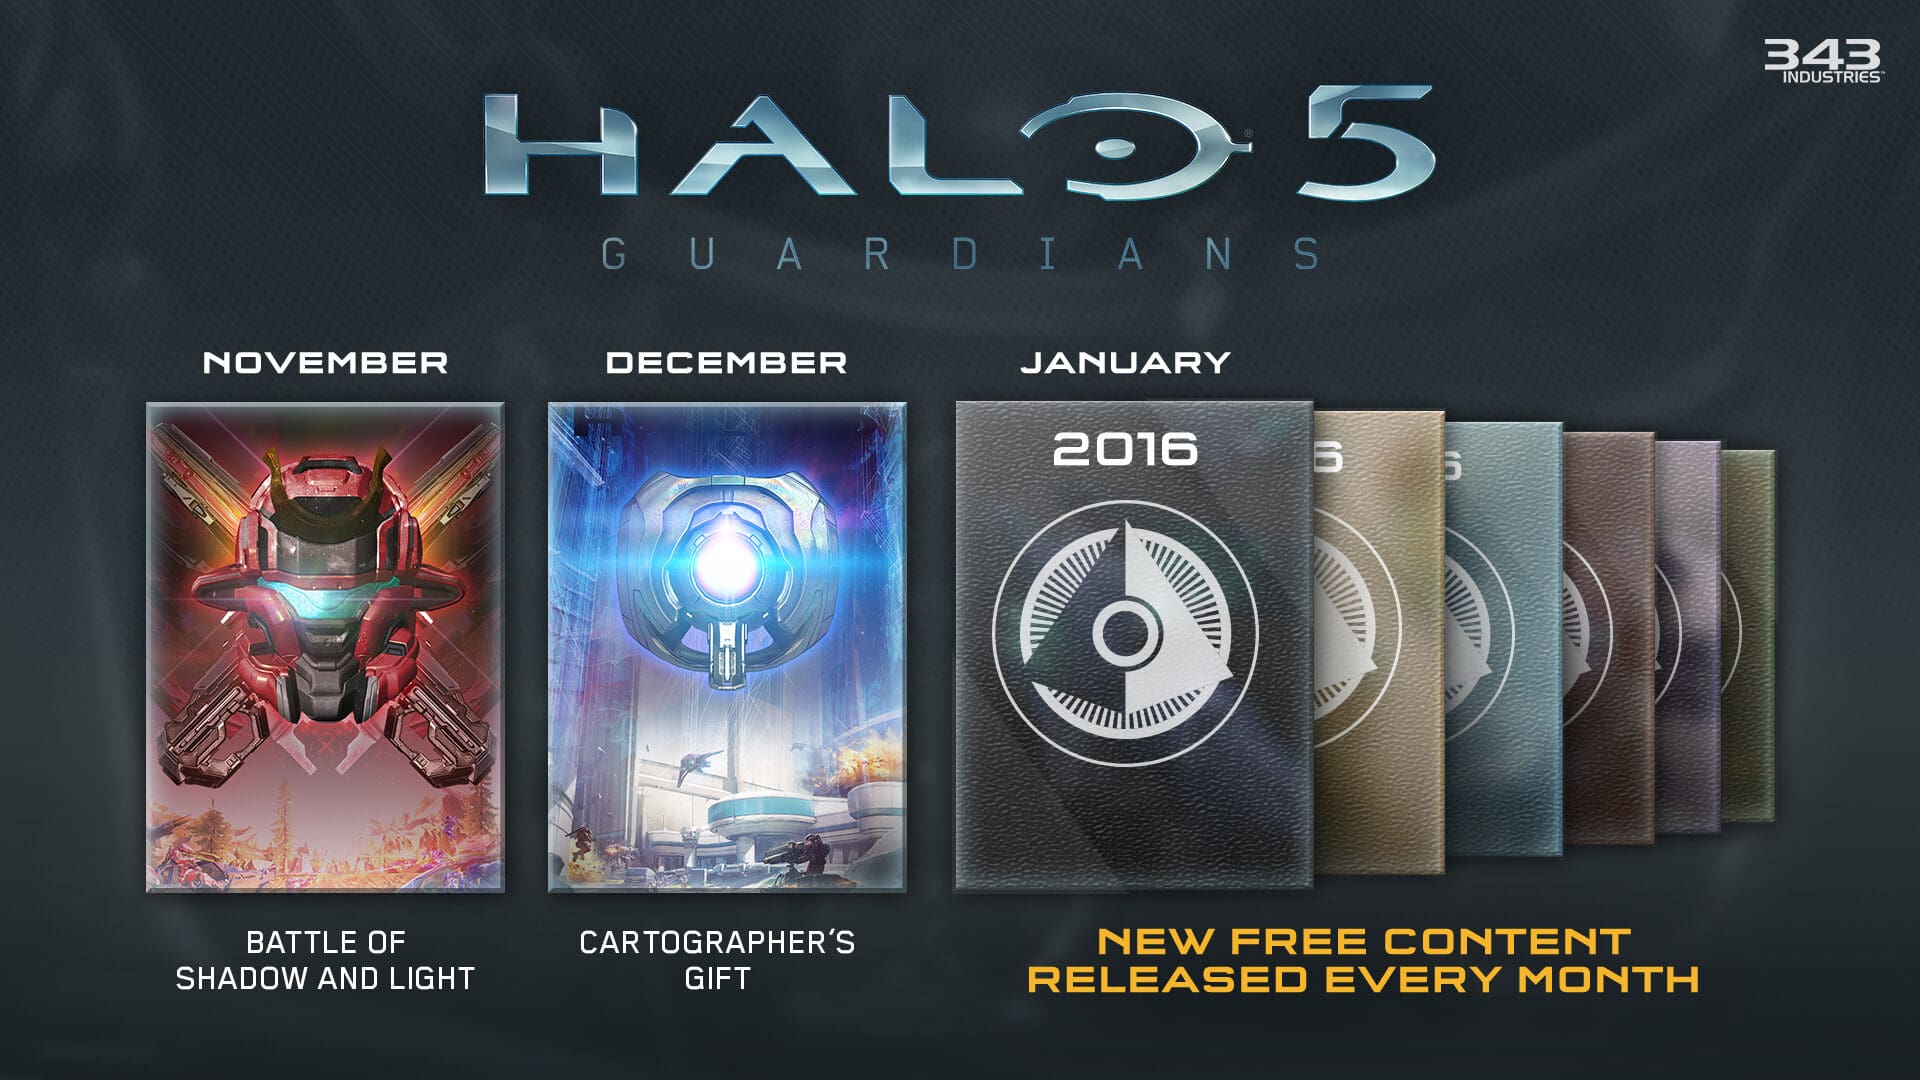 Halo 5 Update Announced. Get Ready To Build!